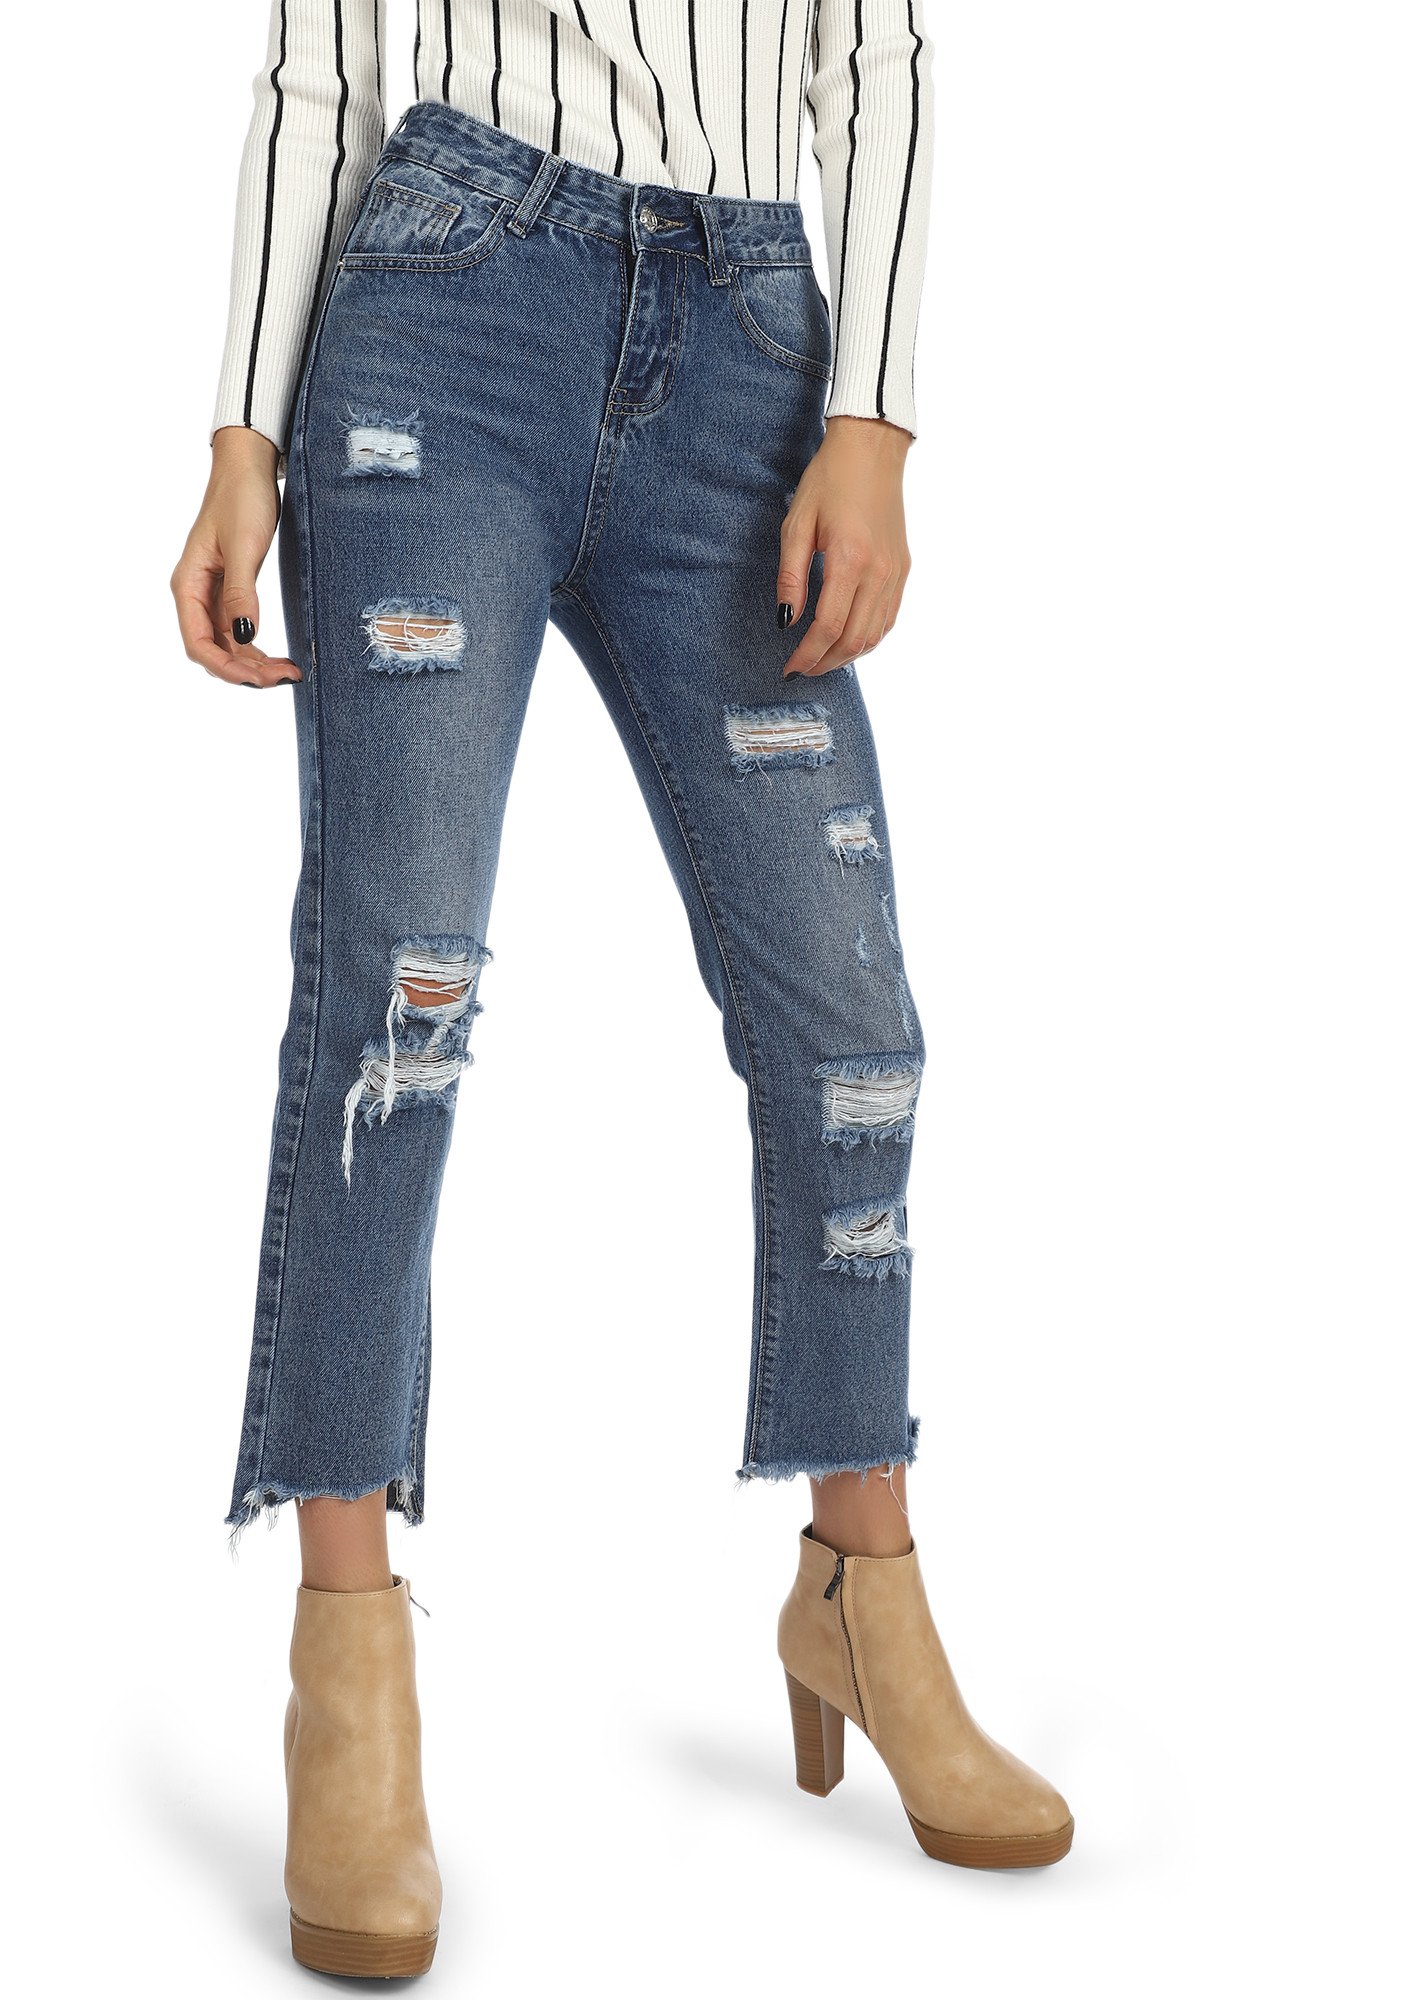 FAKE PROMISES LIGHT BLUE CROPPED JEANS